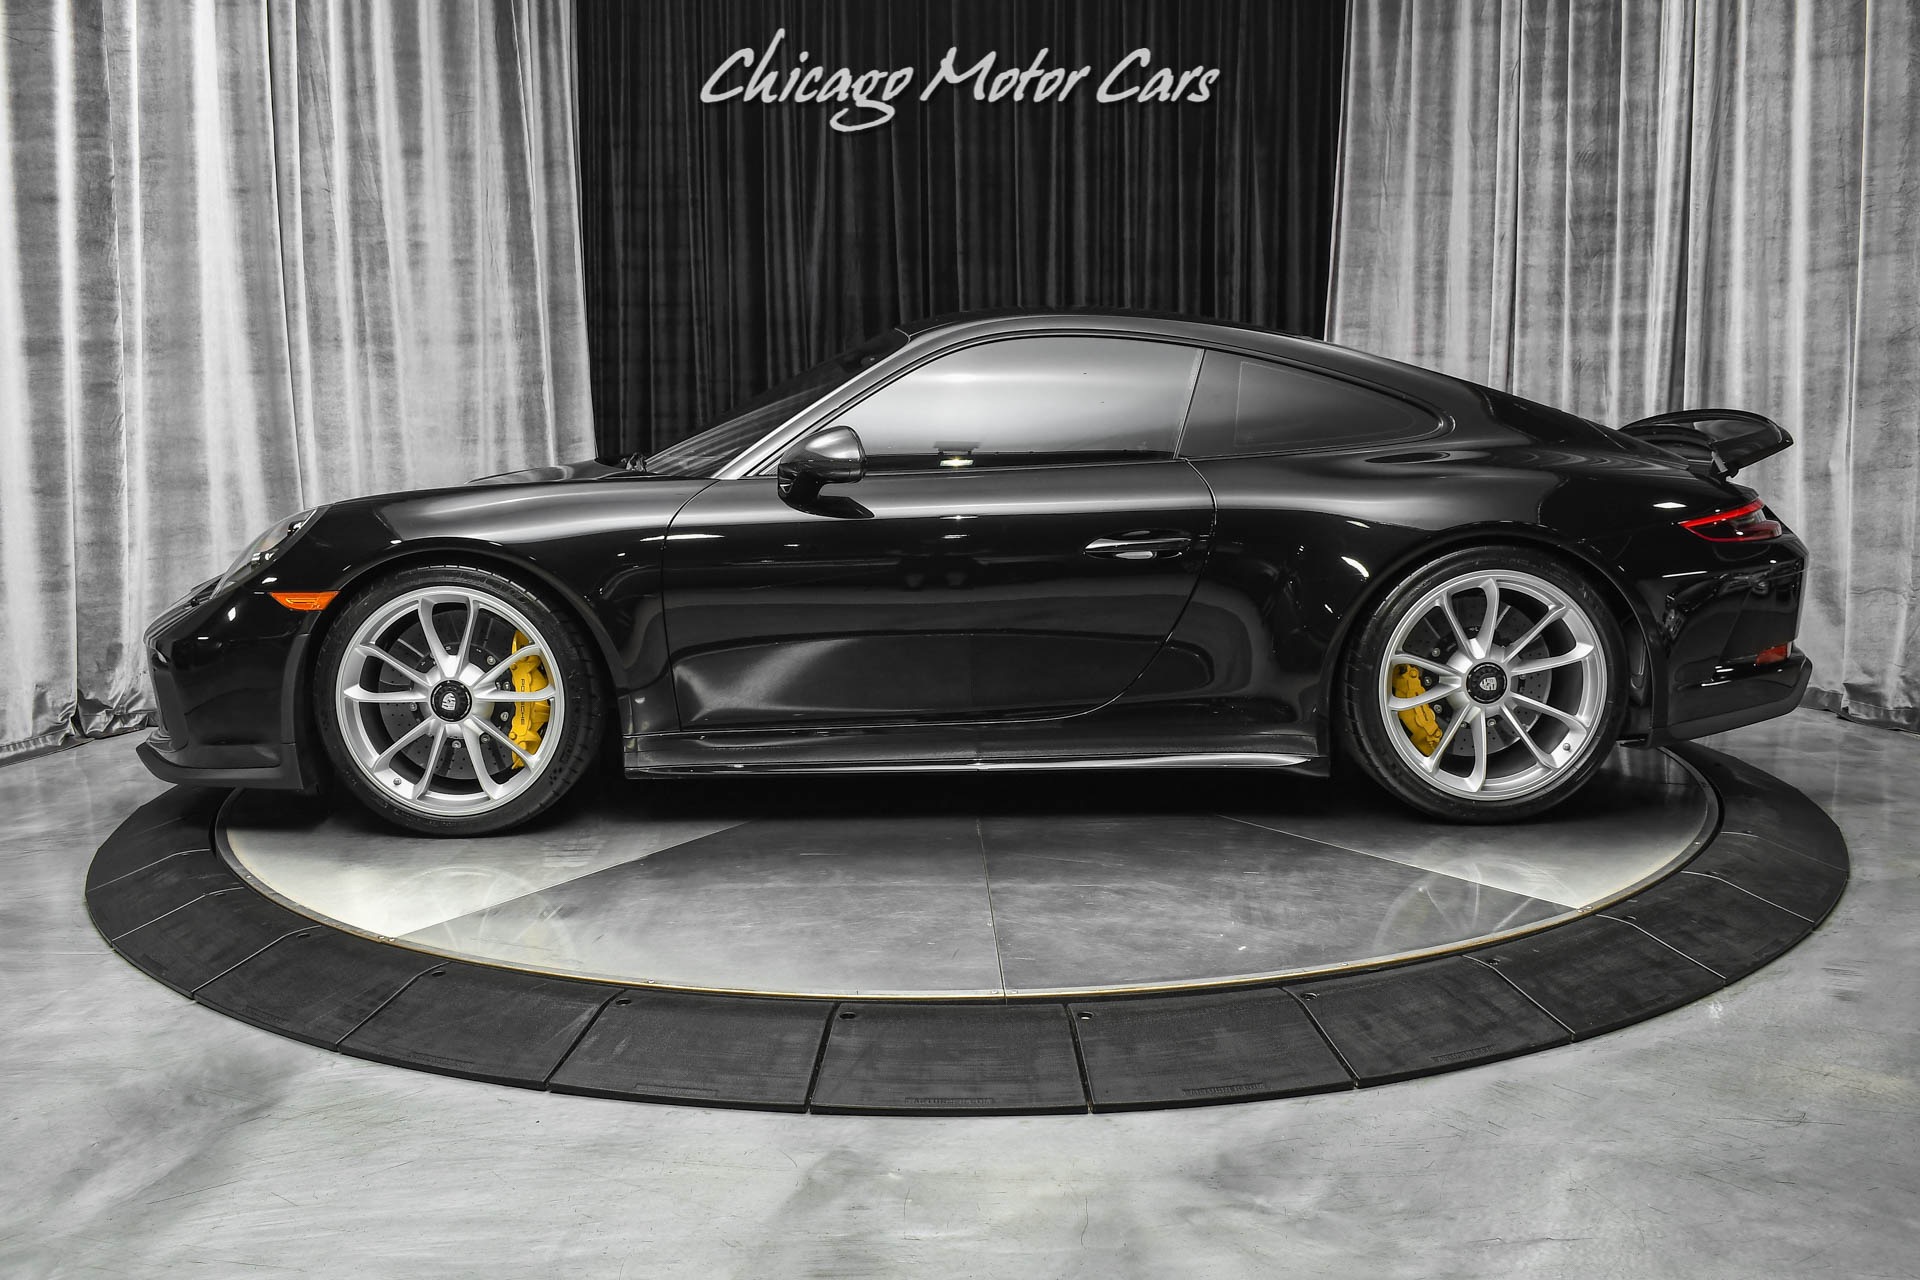 Used-2018-Porsche-911-GT3-Touring-Coupe-PCCB-6-Speed-Manual-Transmission-18-Way-Sport-Seats